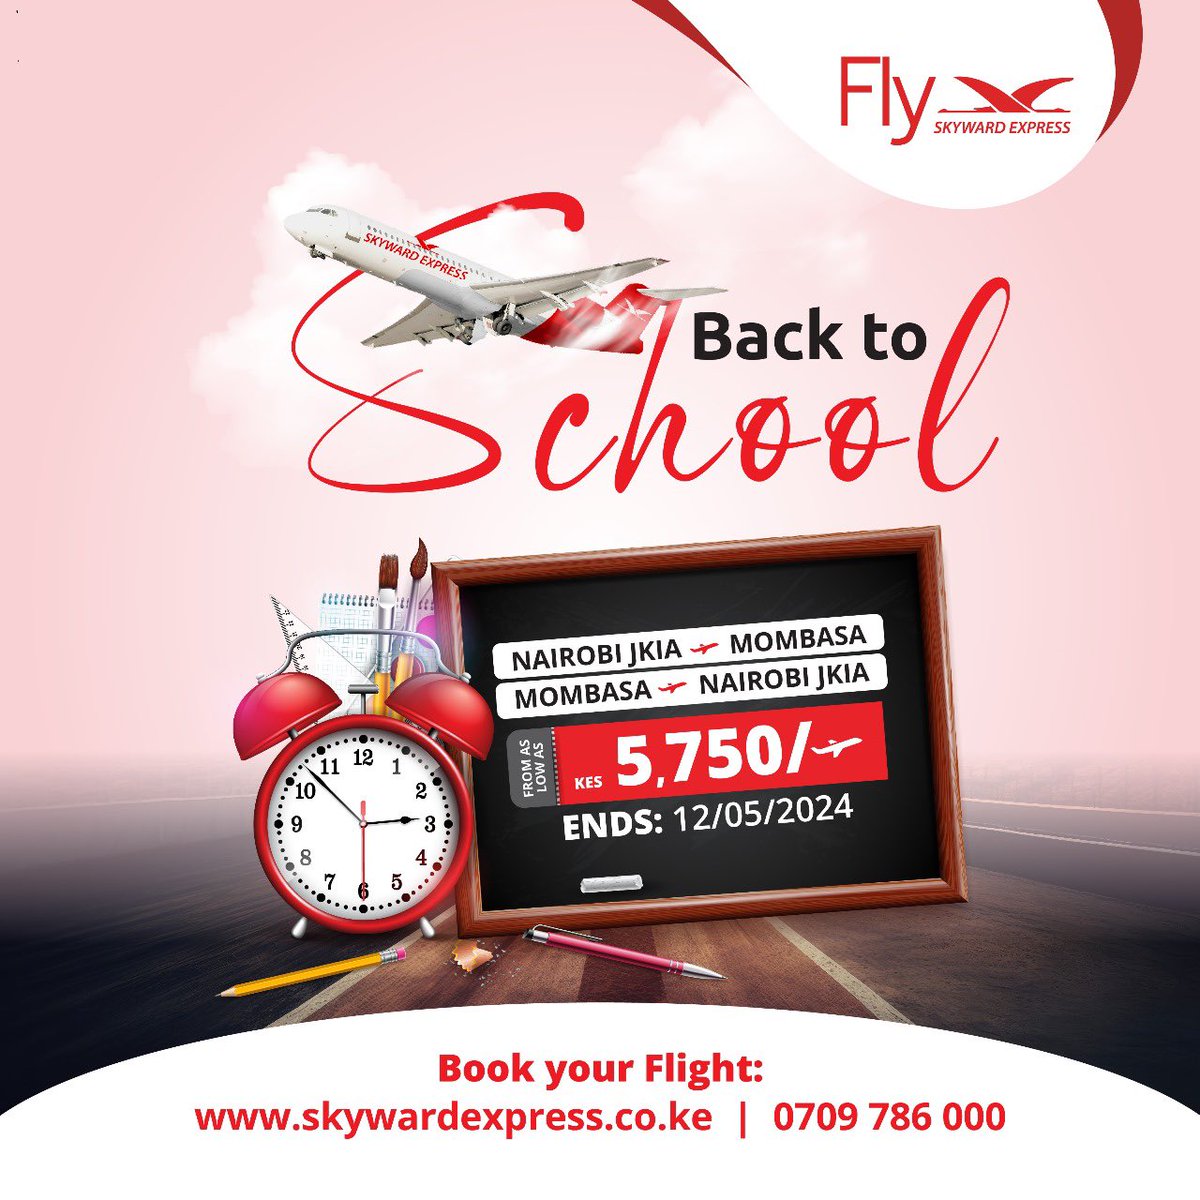 Unbeatable back-to-school offer! Fly from JKIA to Mombasa and back for just 5,750ksh! Book now at skywardexpress.co.ke or call 070978600 #backtoschool #jkia #mombasa